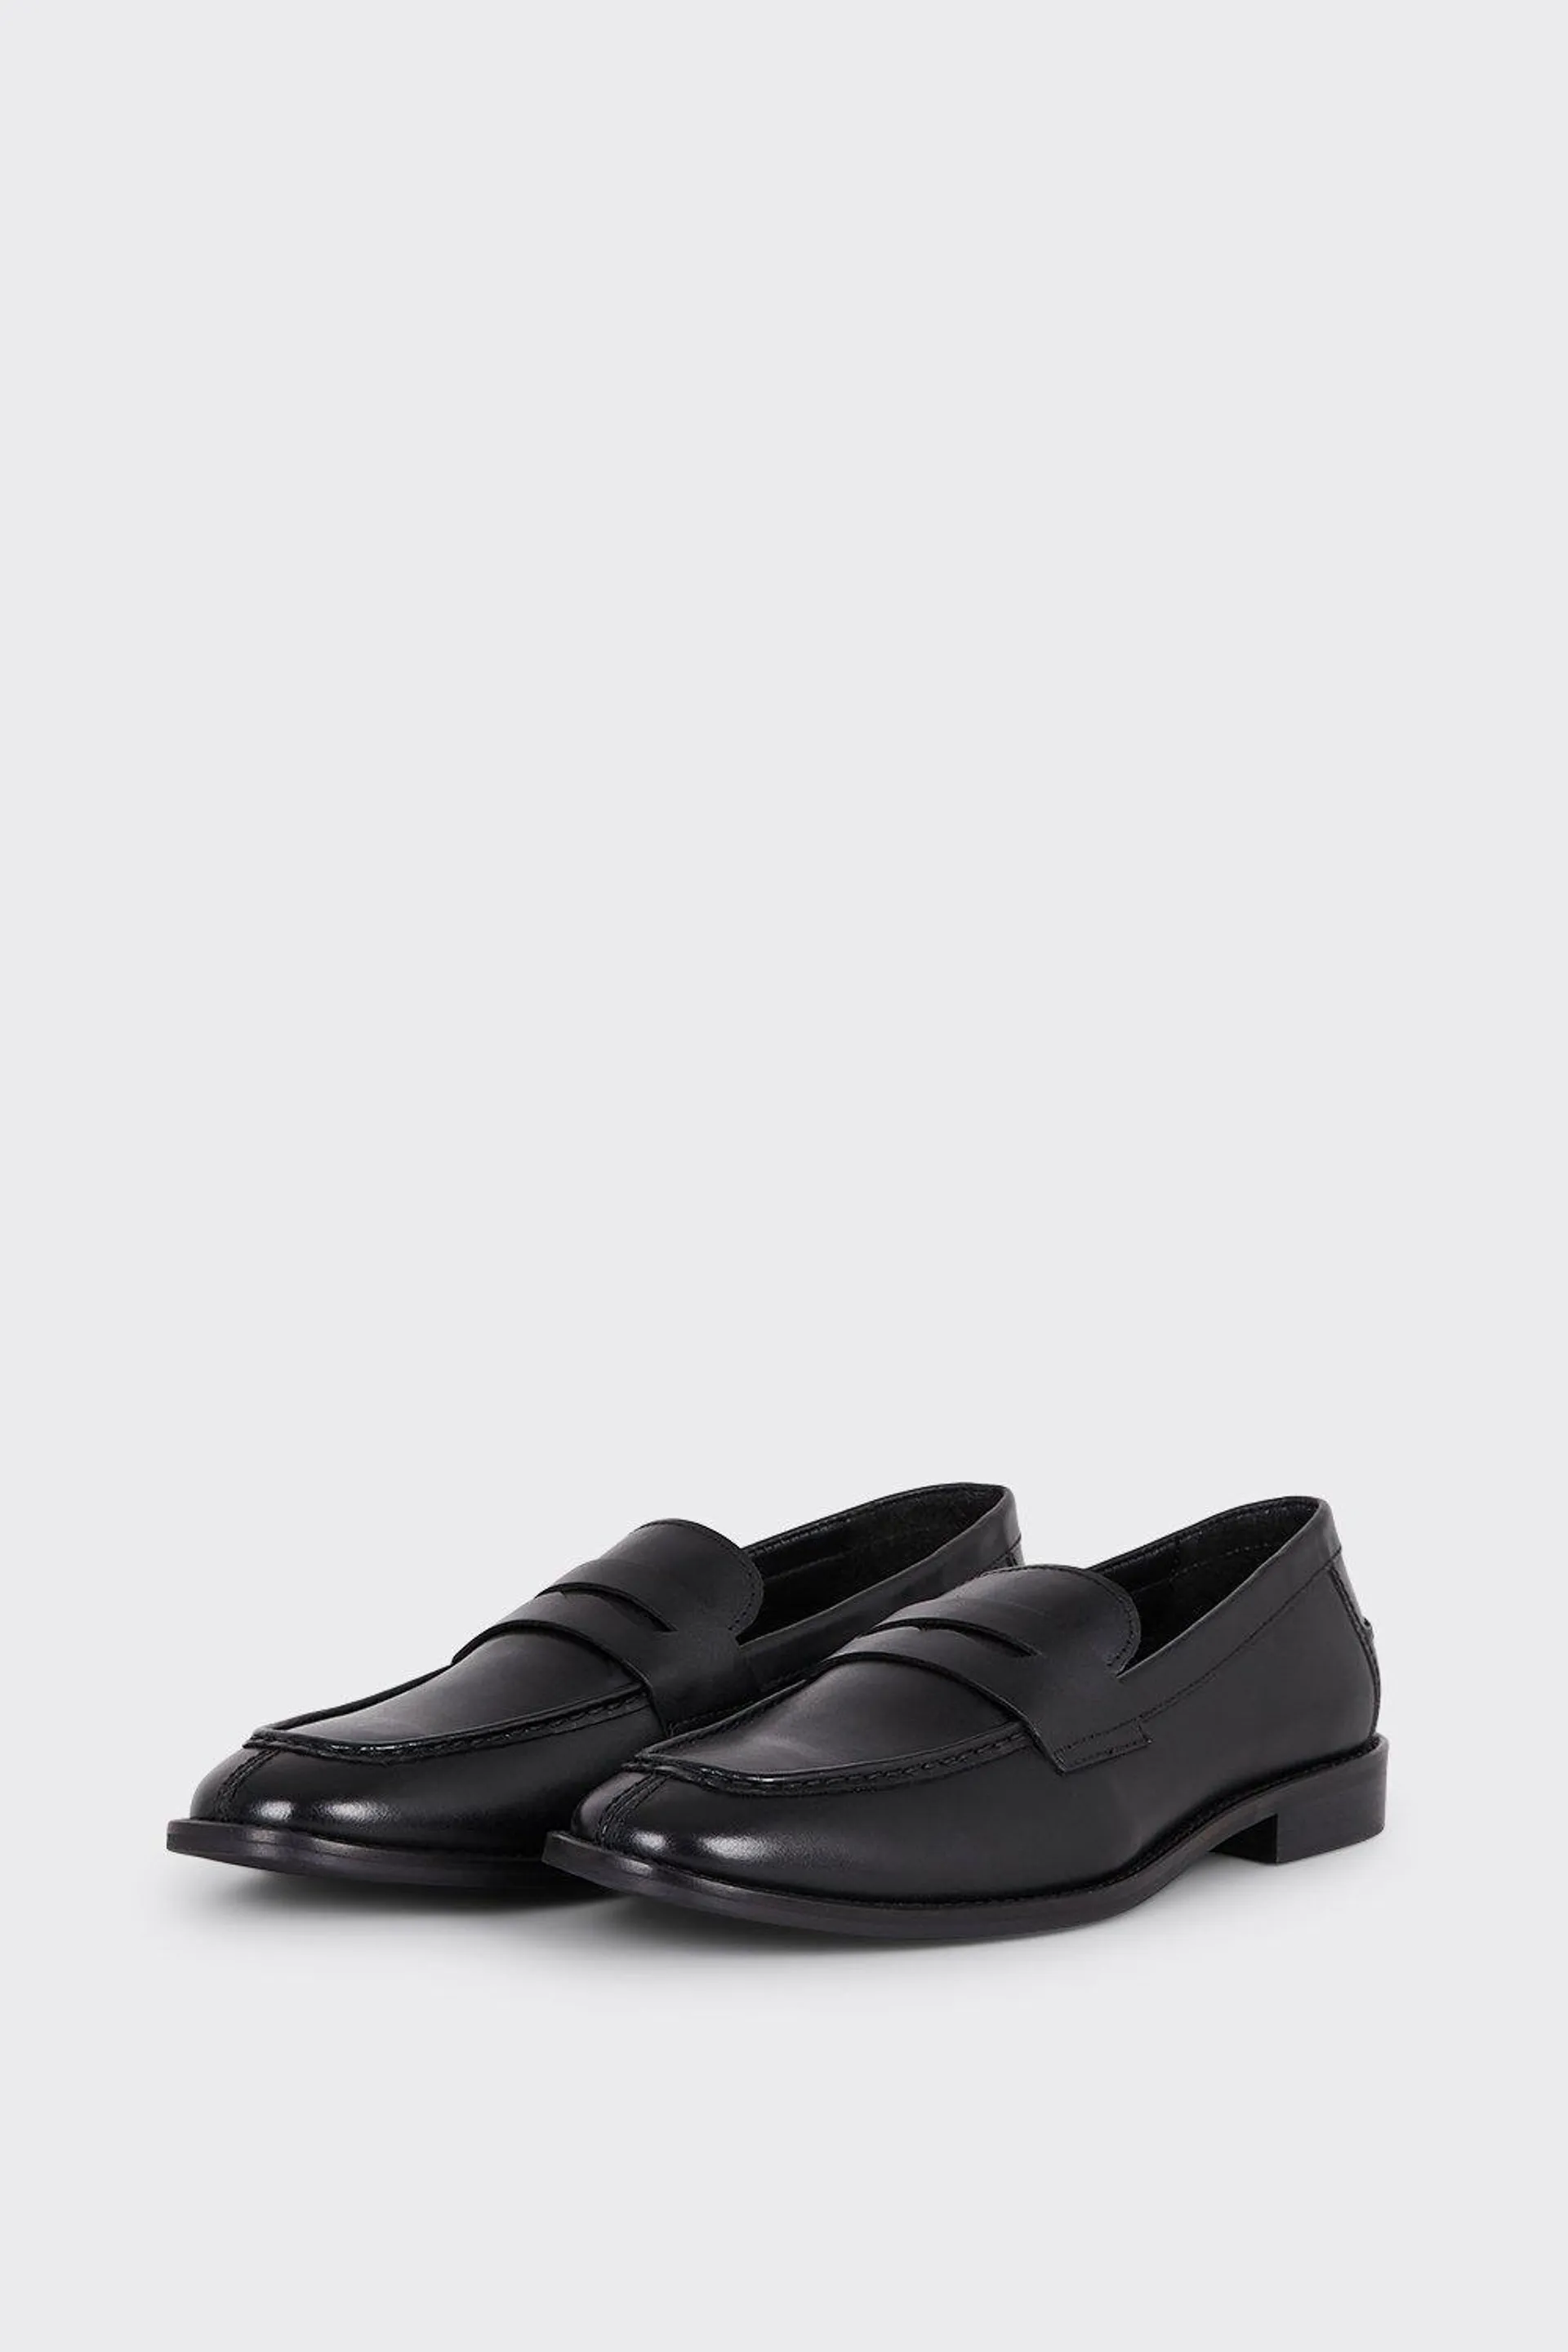 Black Leather Plain Loafers